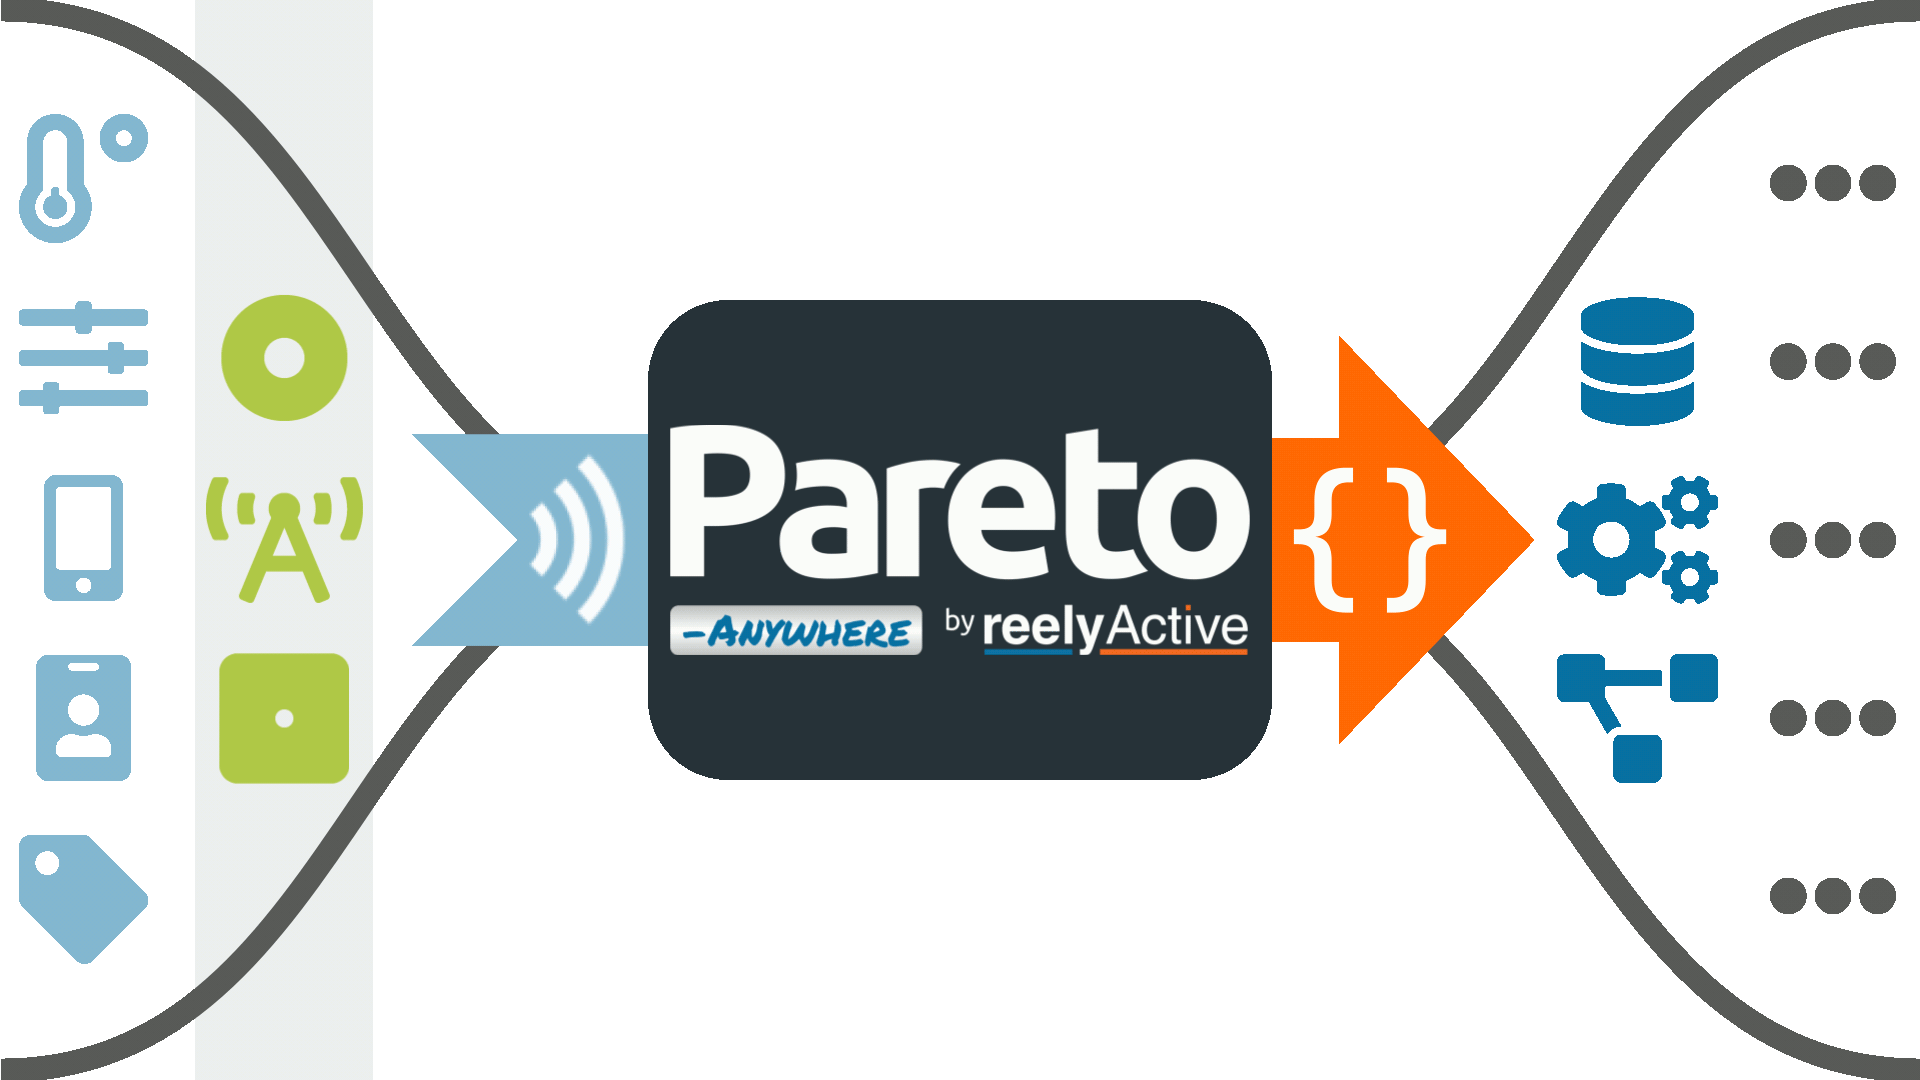 Pareto Anywhere Ambient Infrastructure